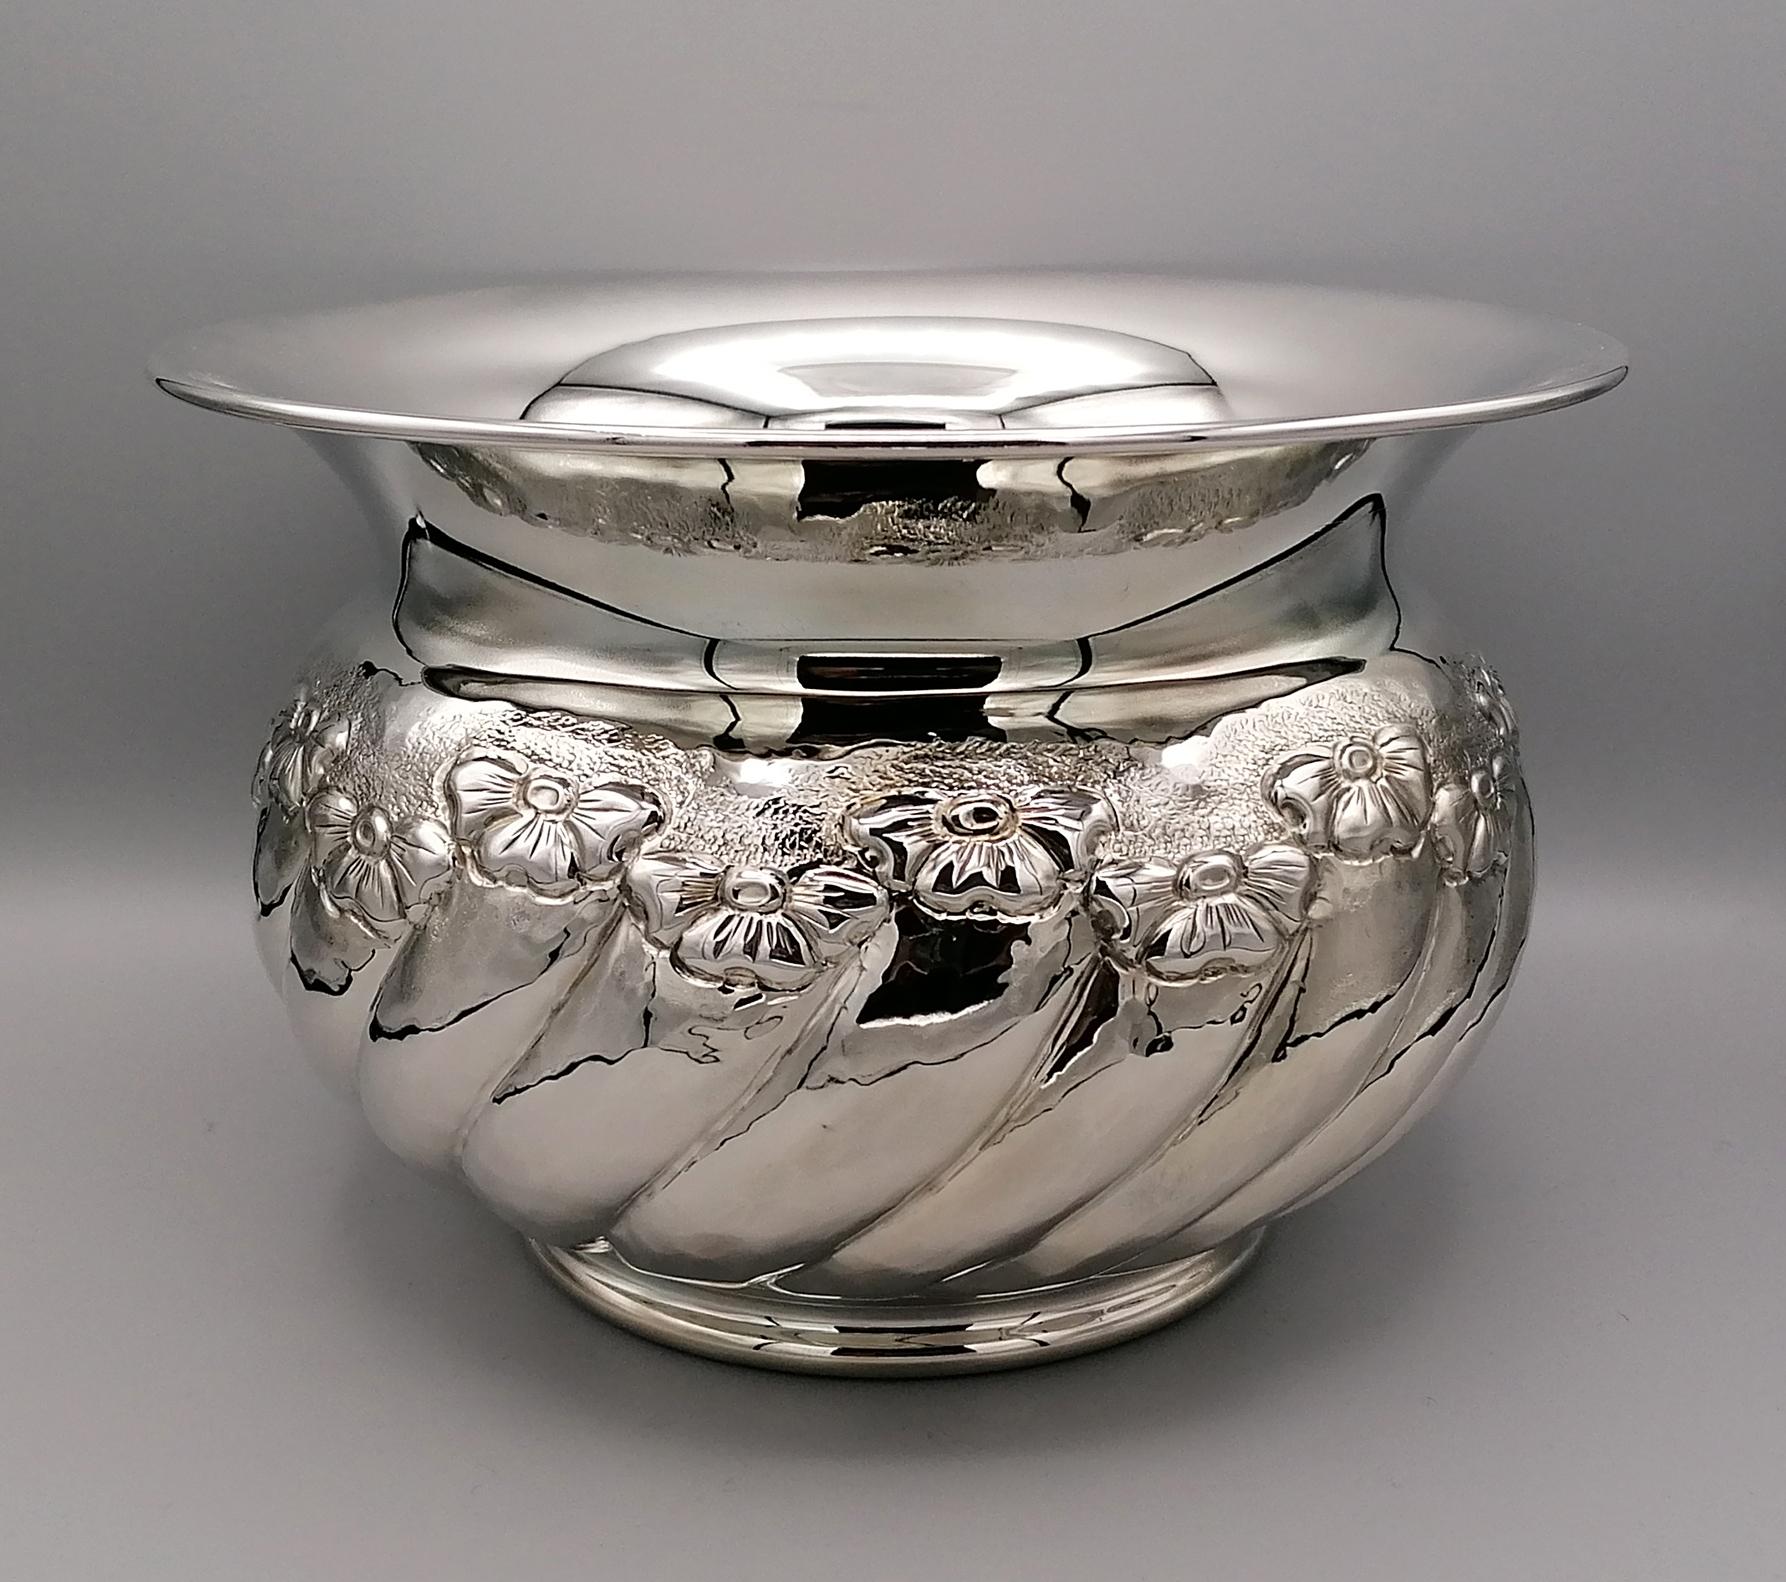 Sterling silver cachepot ceased and embossed by hand with flowers.
The lightly hammered body has a tochon shape.
Measure: 1,425 grams.